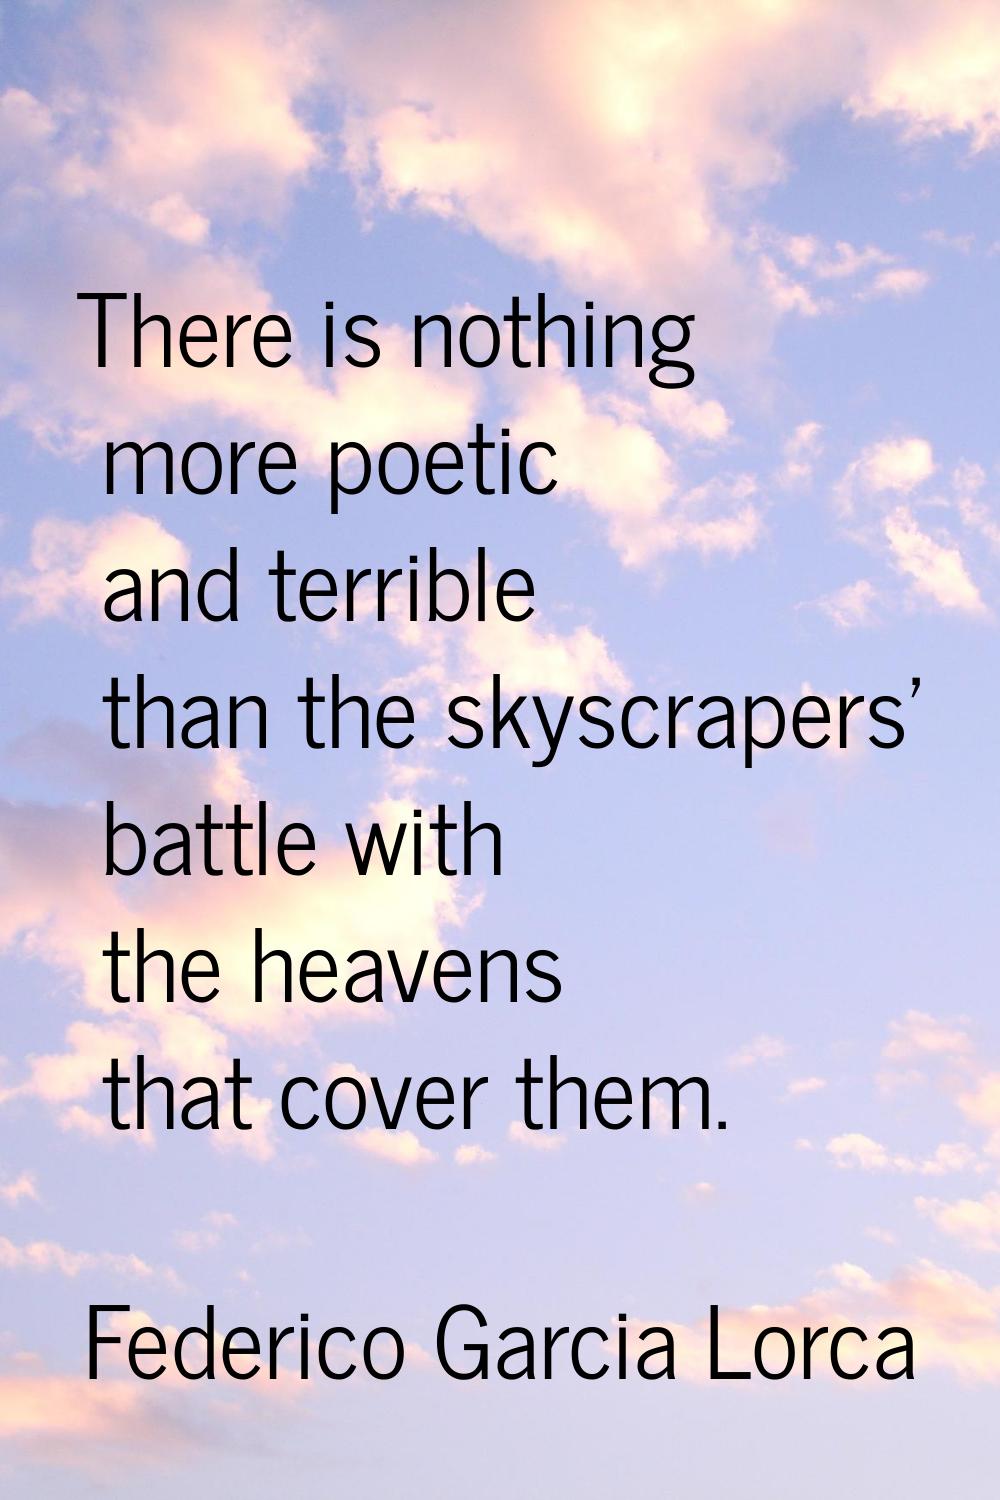 There is nothing more poetic and terrible than the skyscrapers' battle with the heavens that cover 